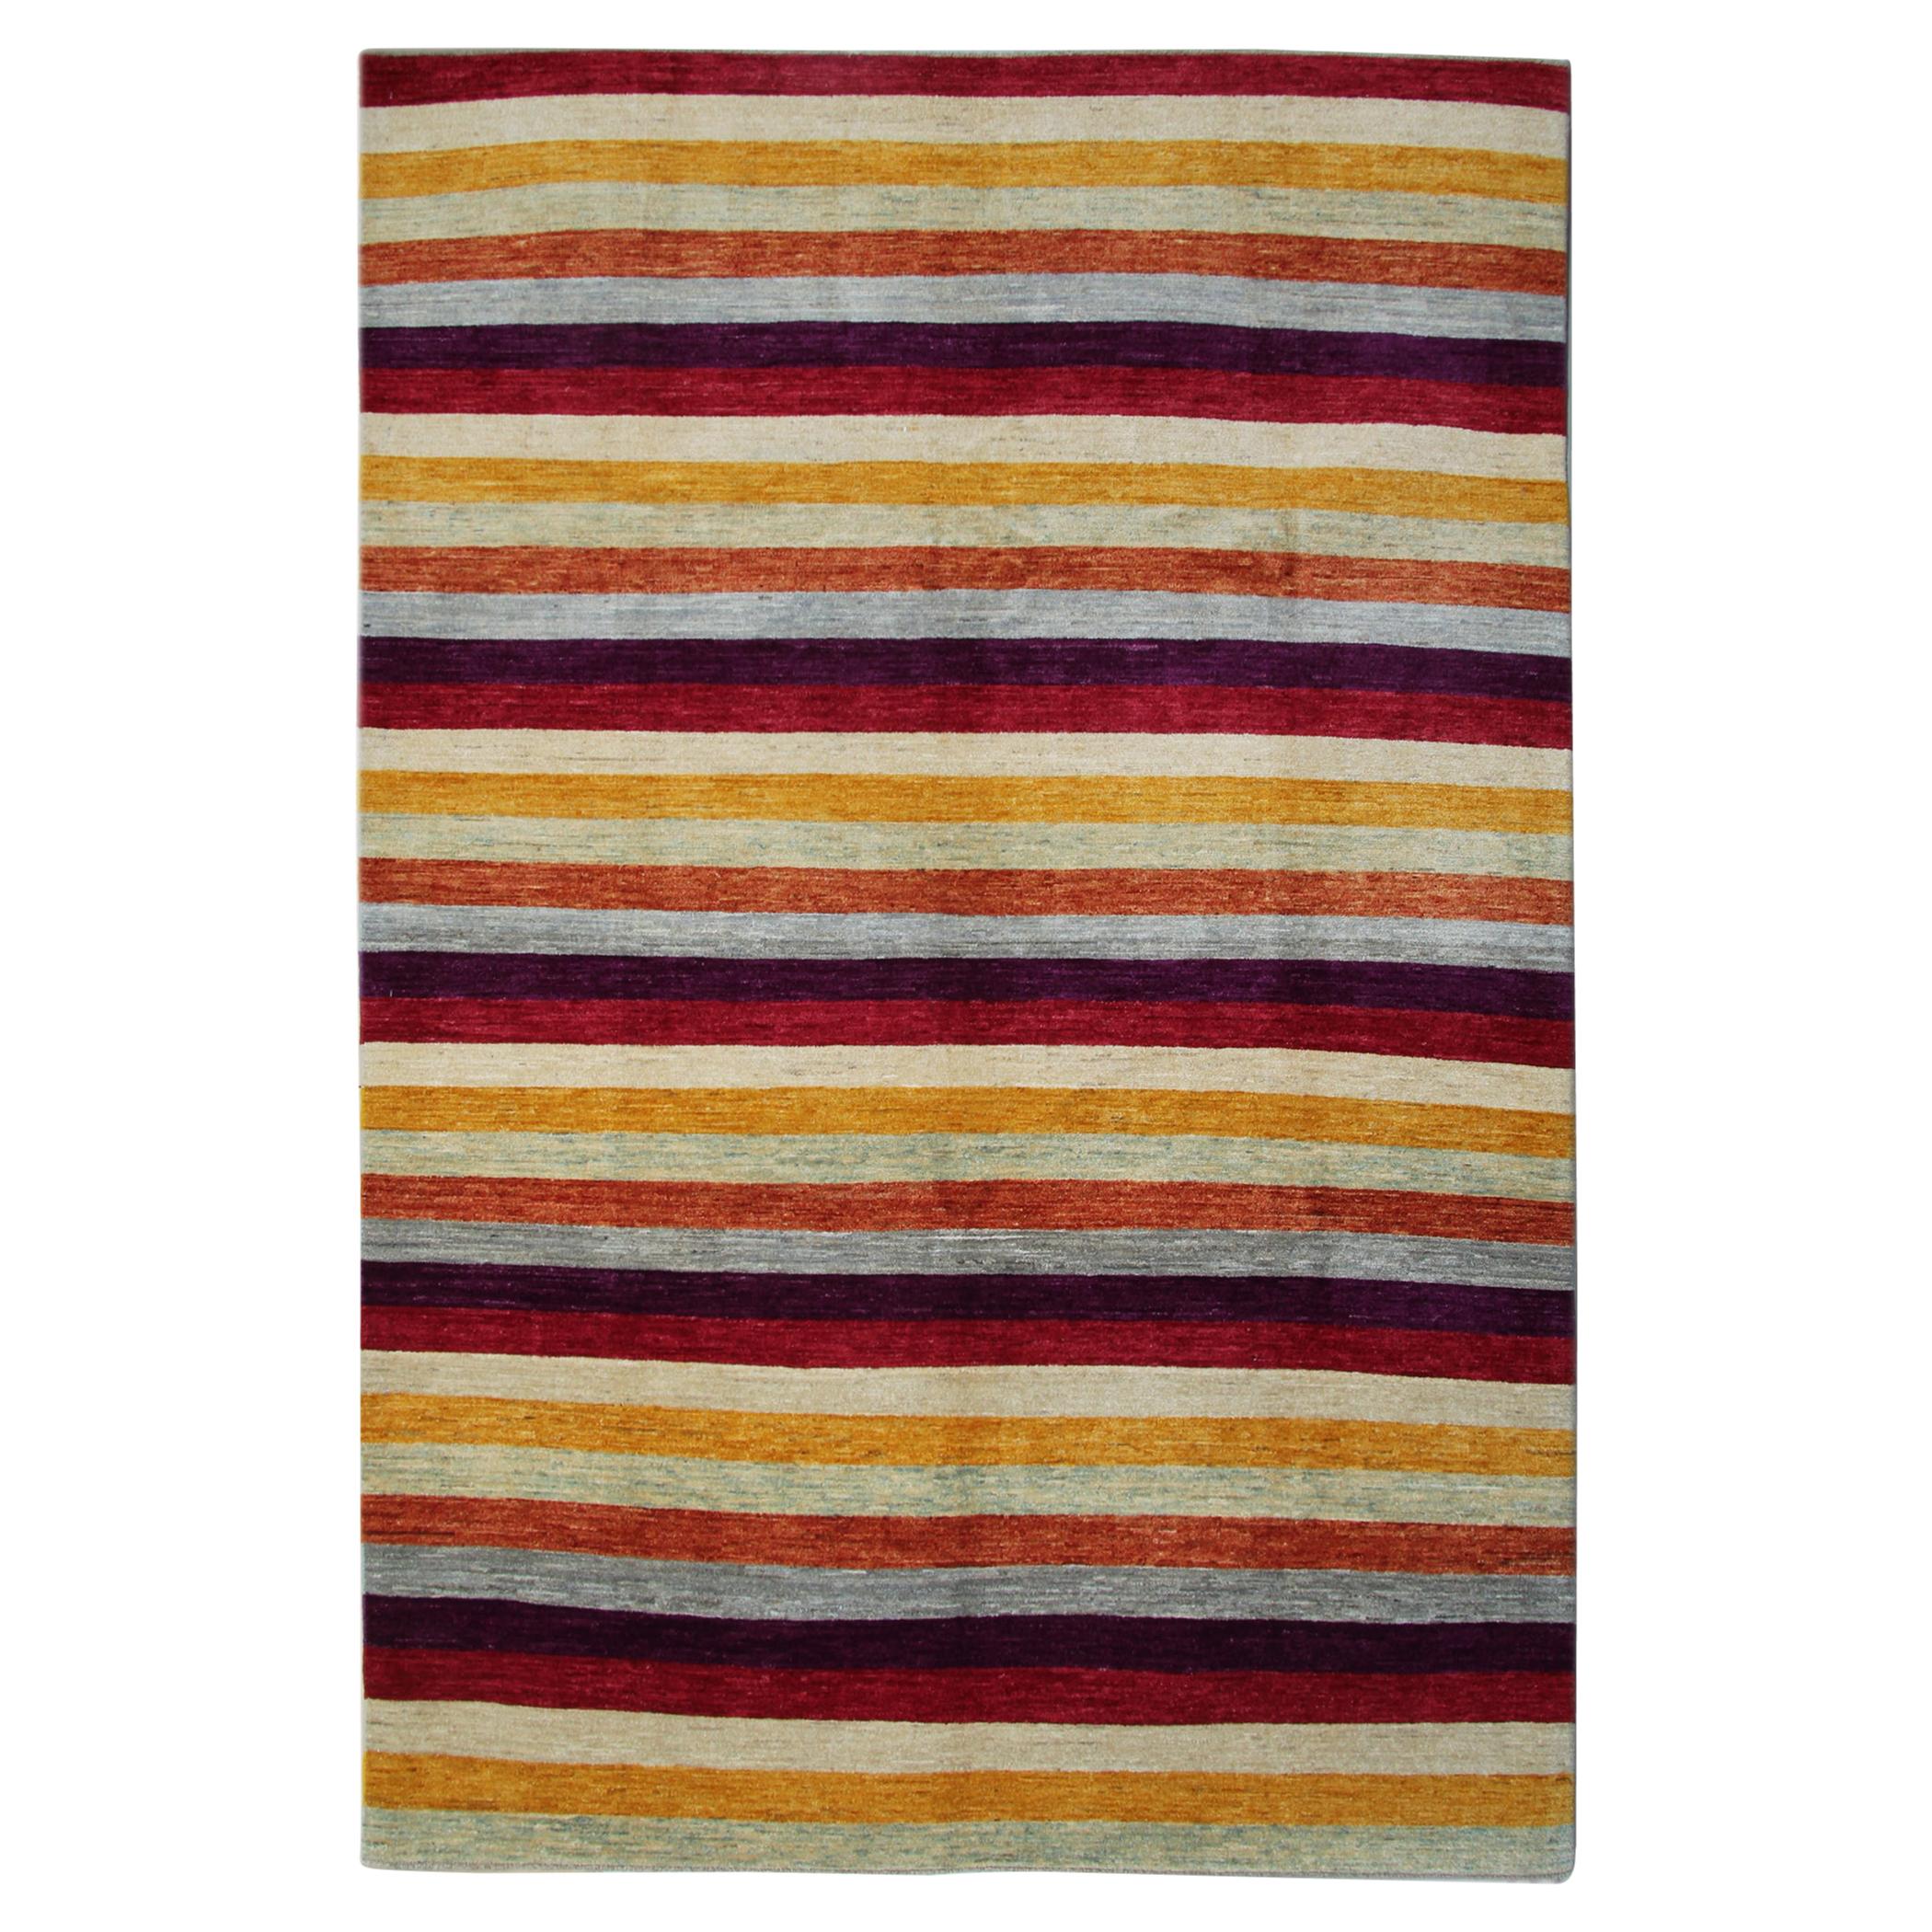 Contemporary Striped Area Rug Multicolored Modern Bedroom Rug For Sale